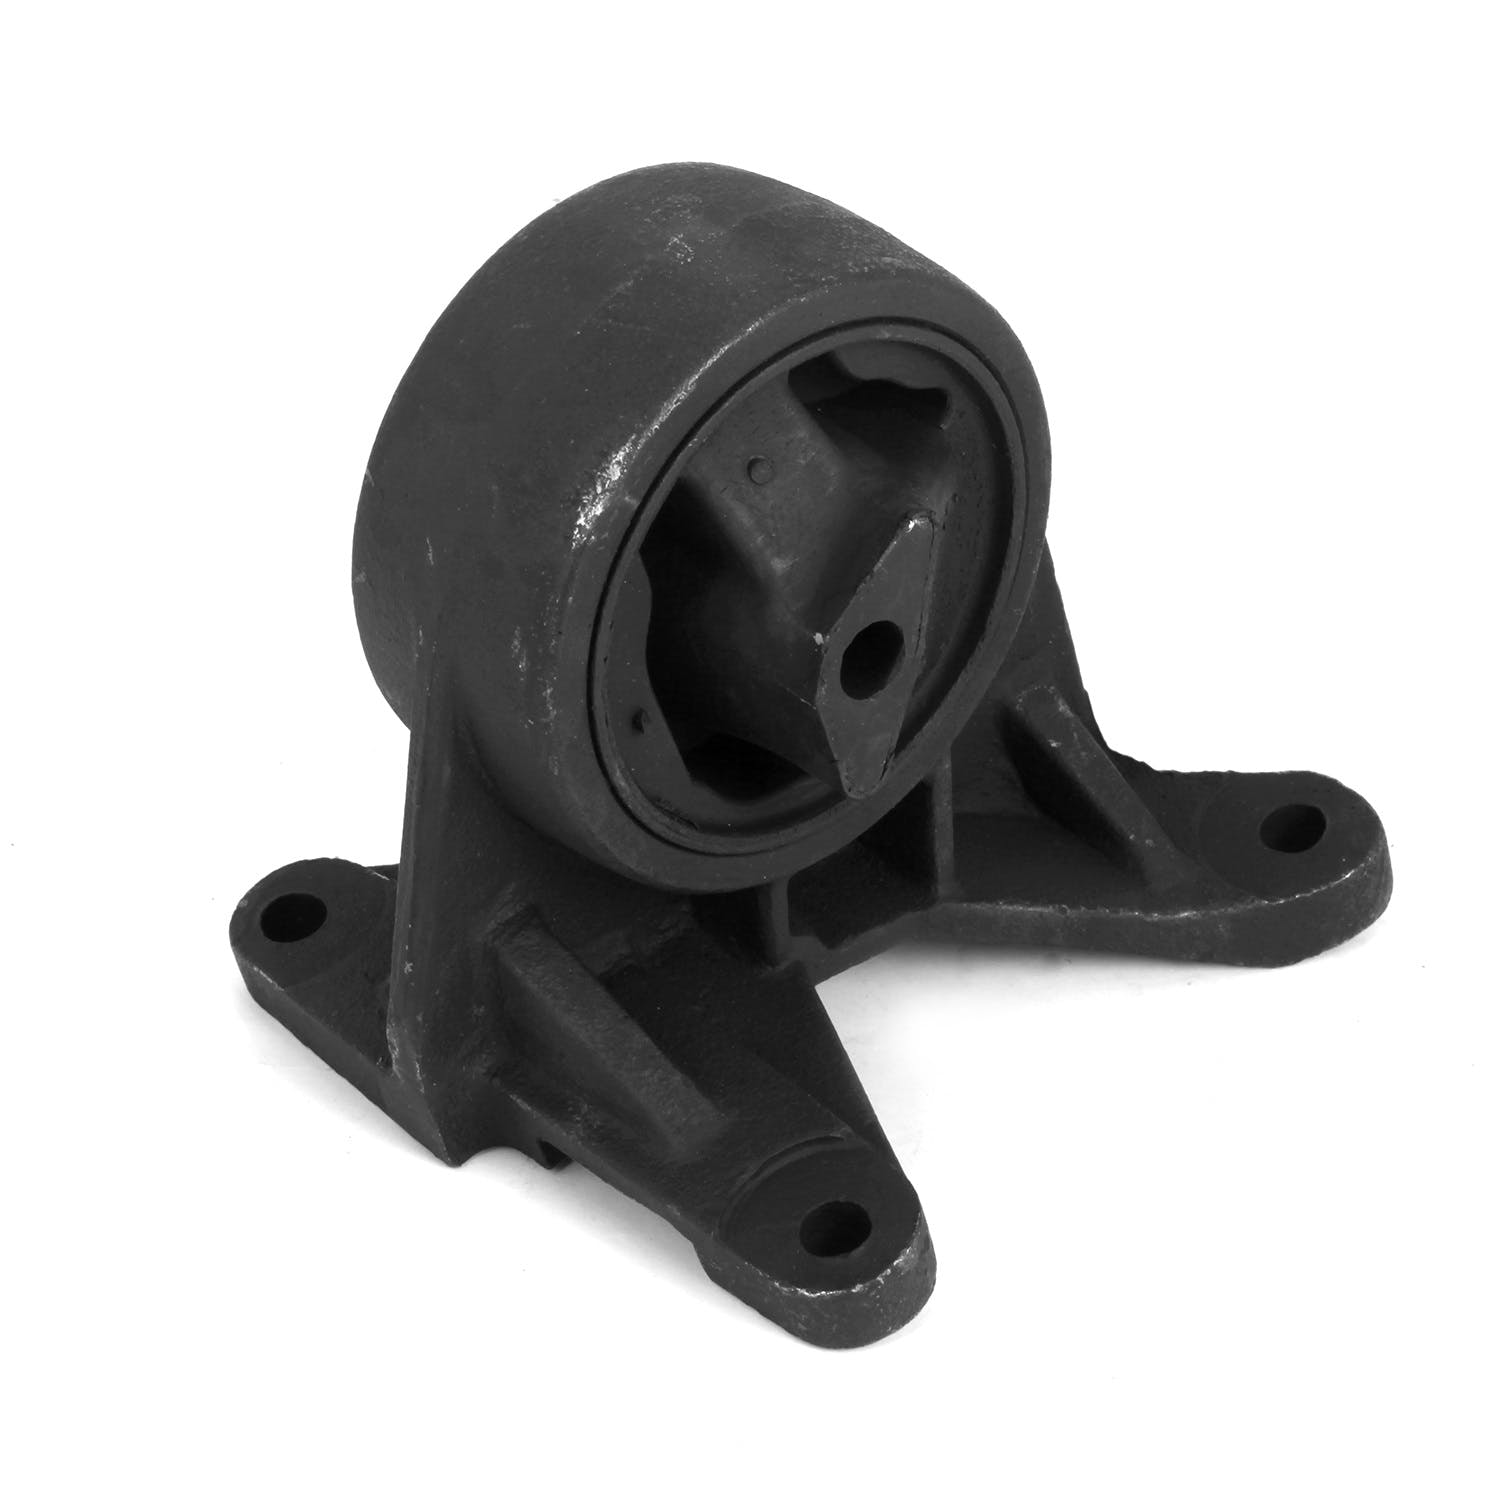 Omix-ADA 17473.24 Replacement Right Side Motor Mount